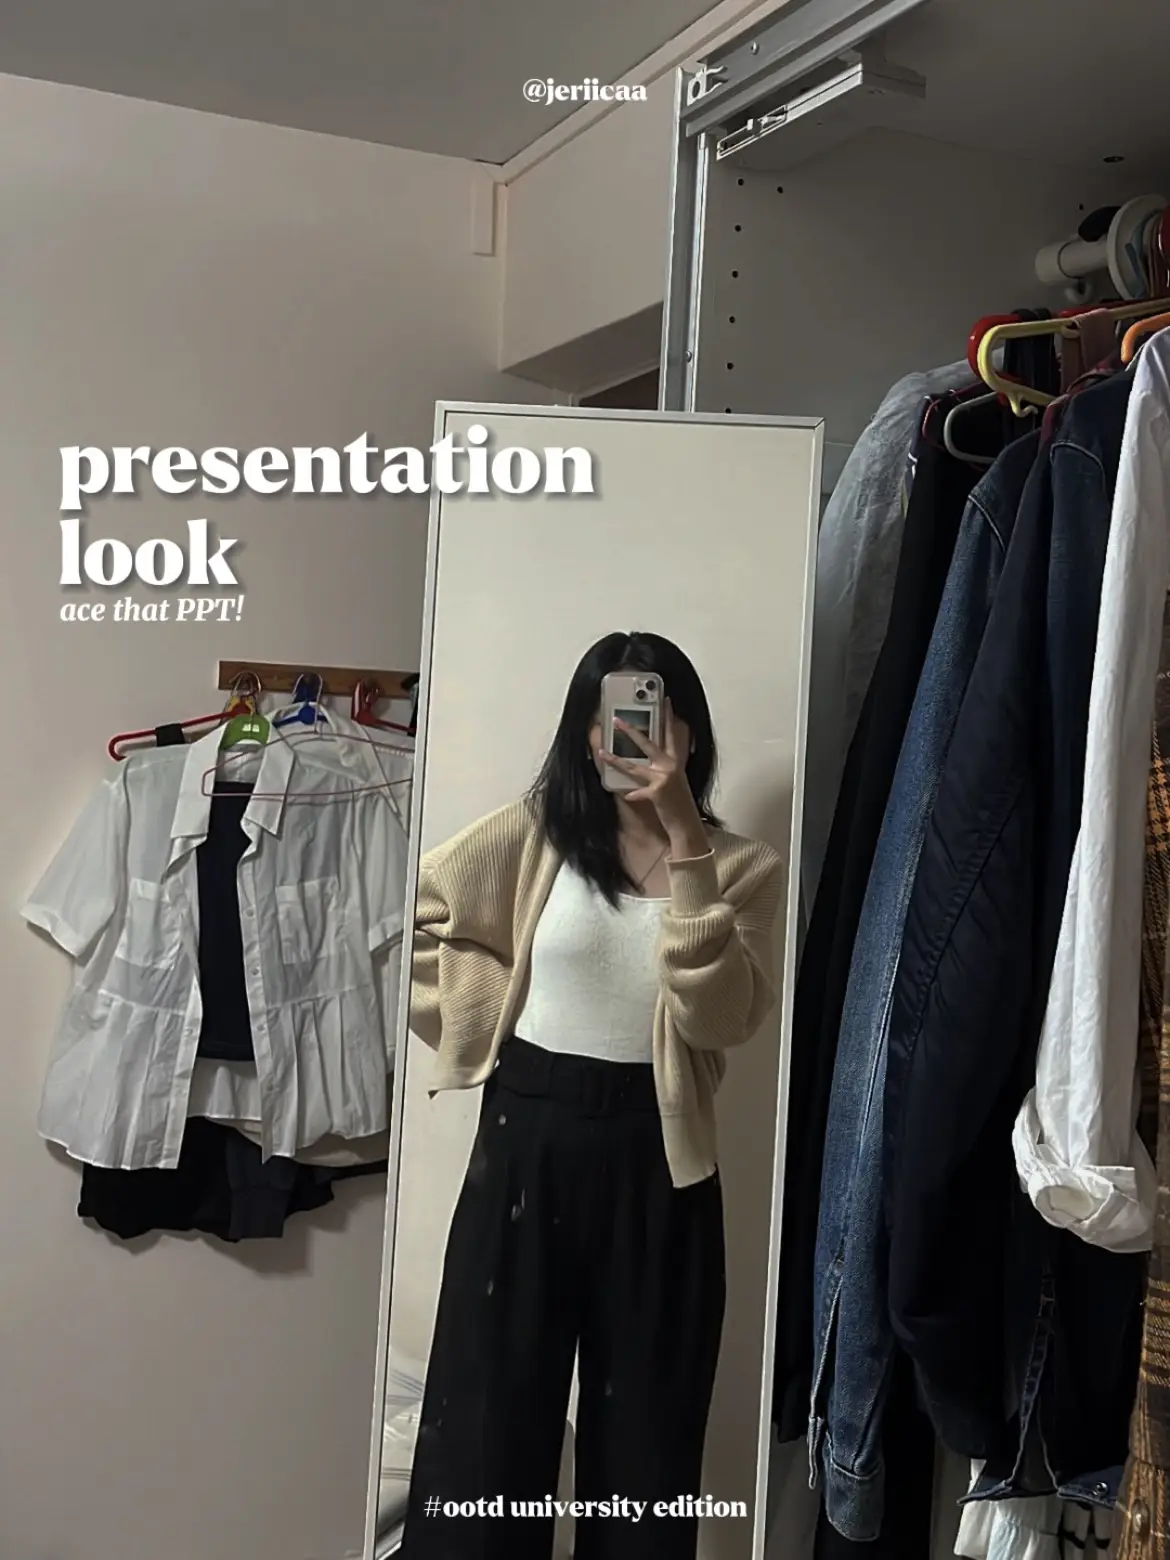 How to Dress for a Class Presentation - College Fashion